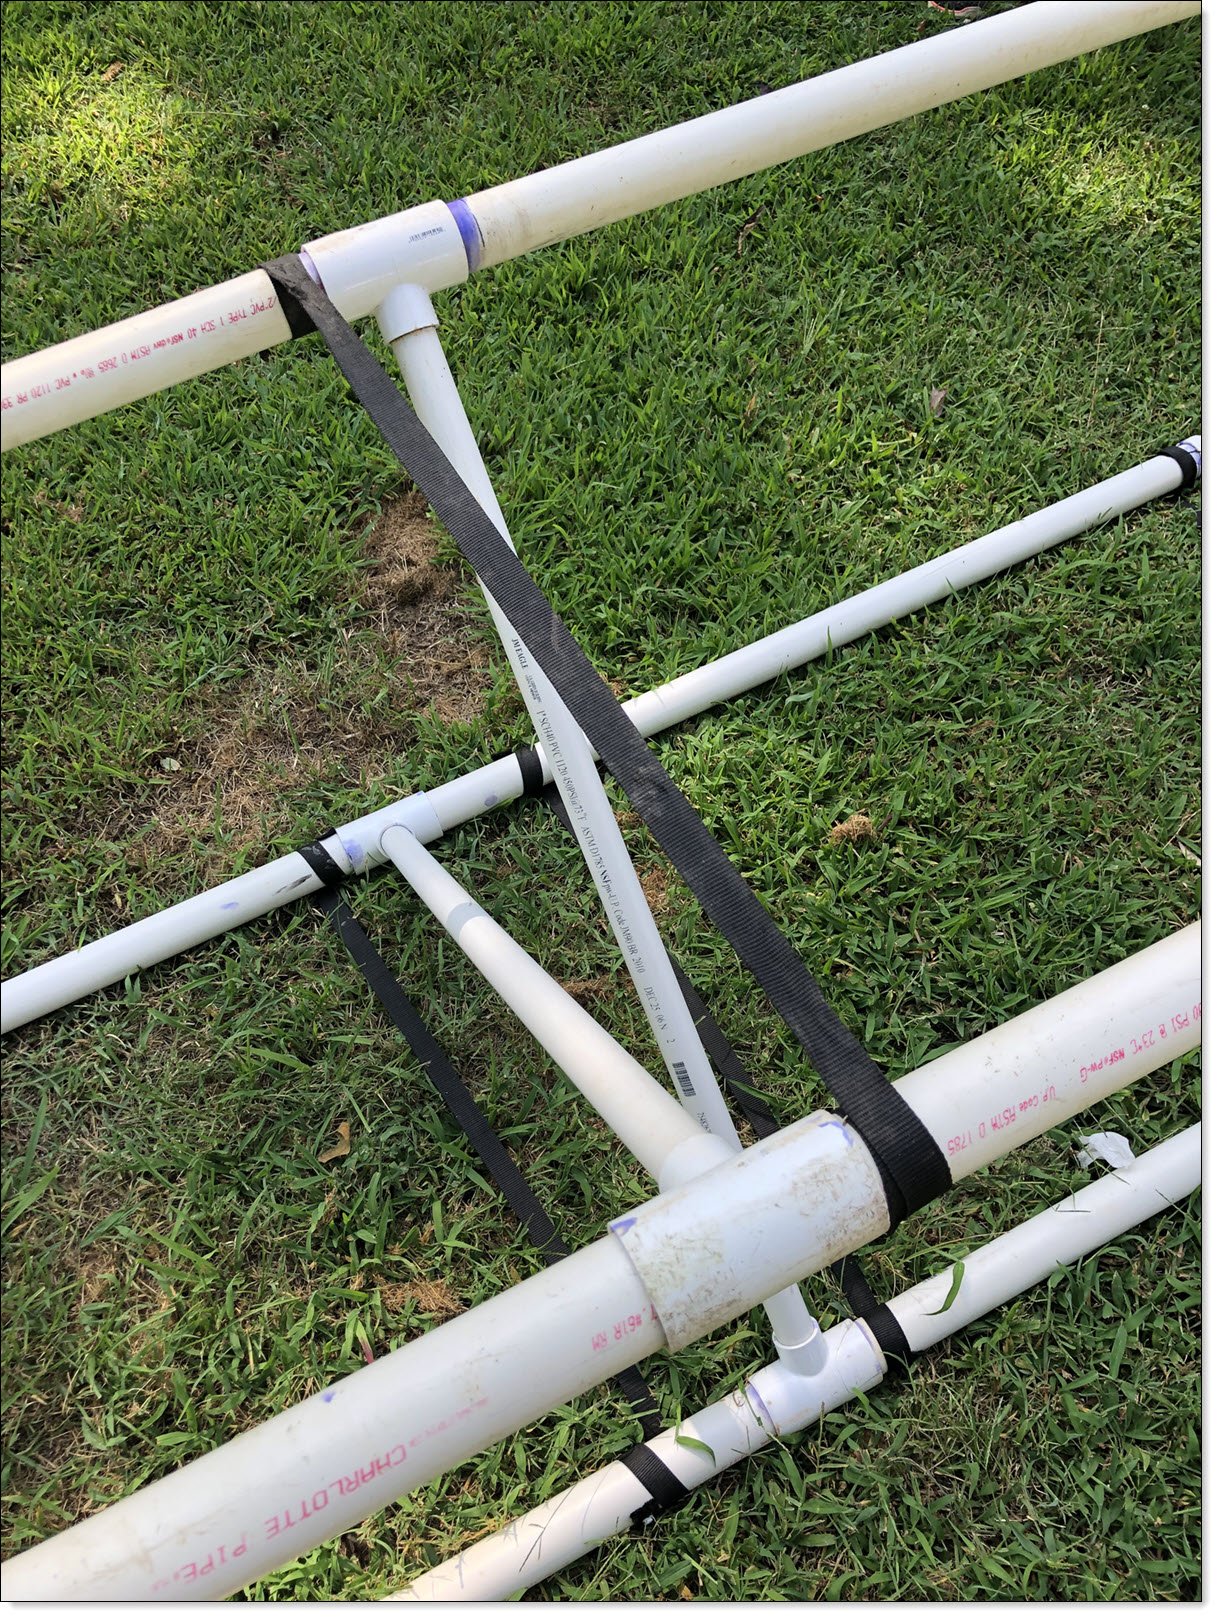 Bottom of kayak work stand showing single supporting nylon strap